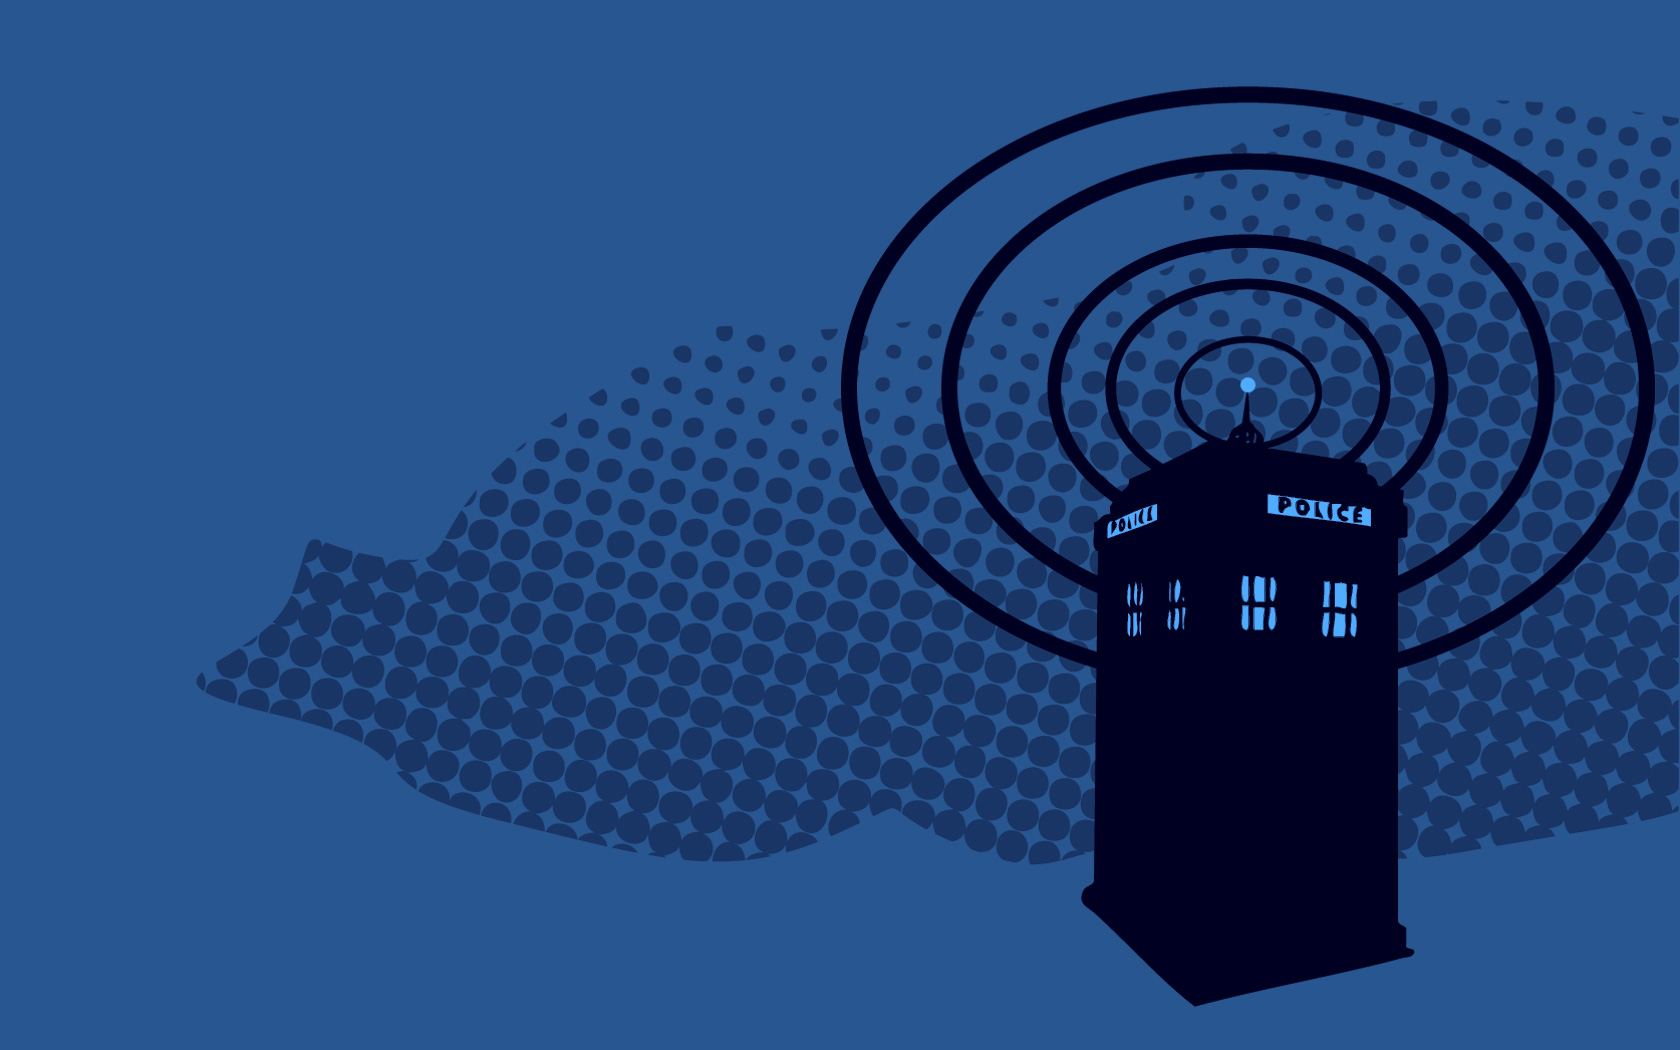 Doctor who wallpapers HD A1